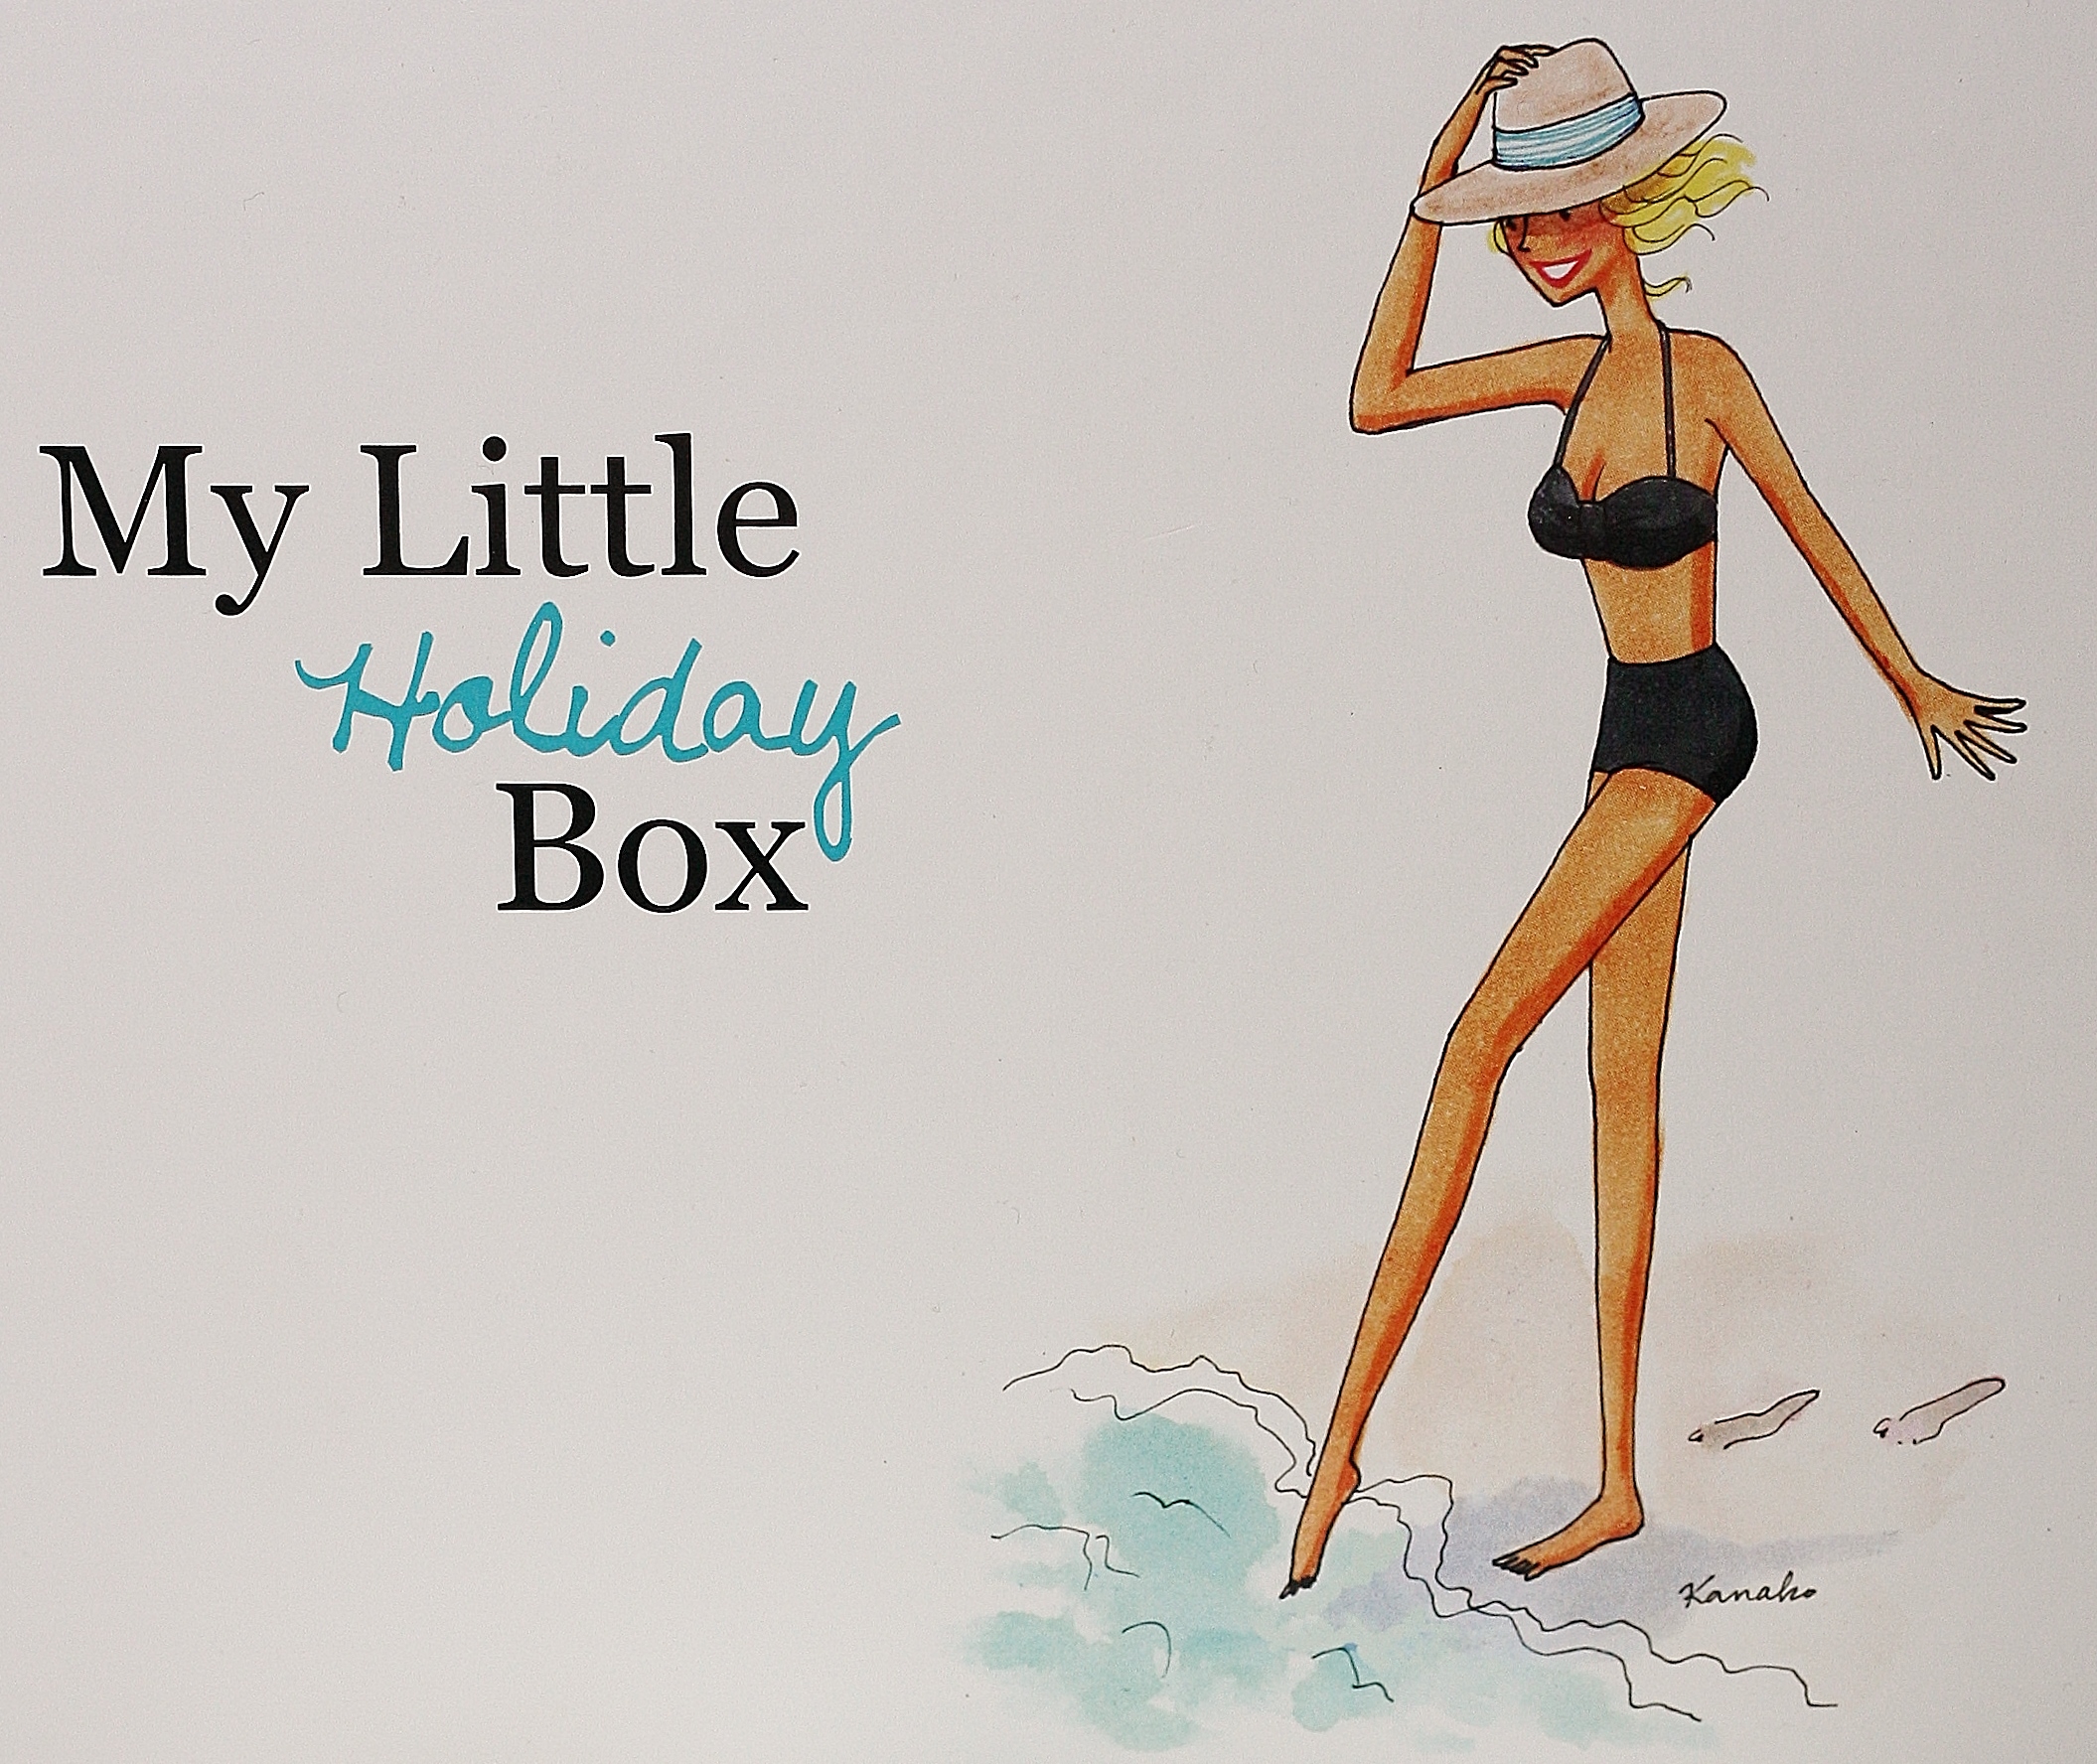 My Little Holiday Box - Juillet 2013